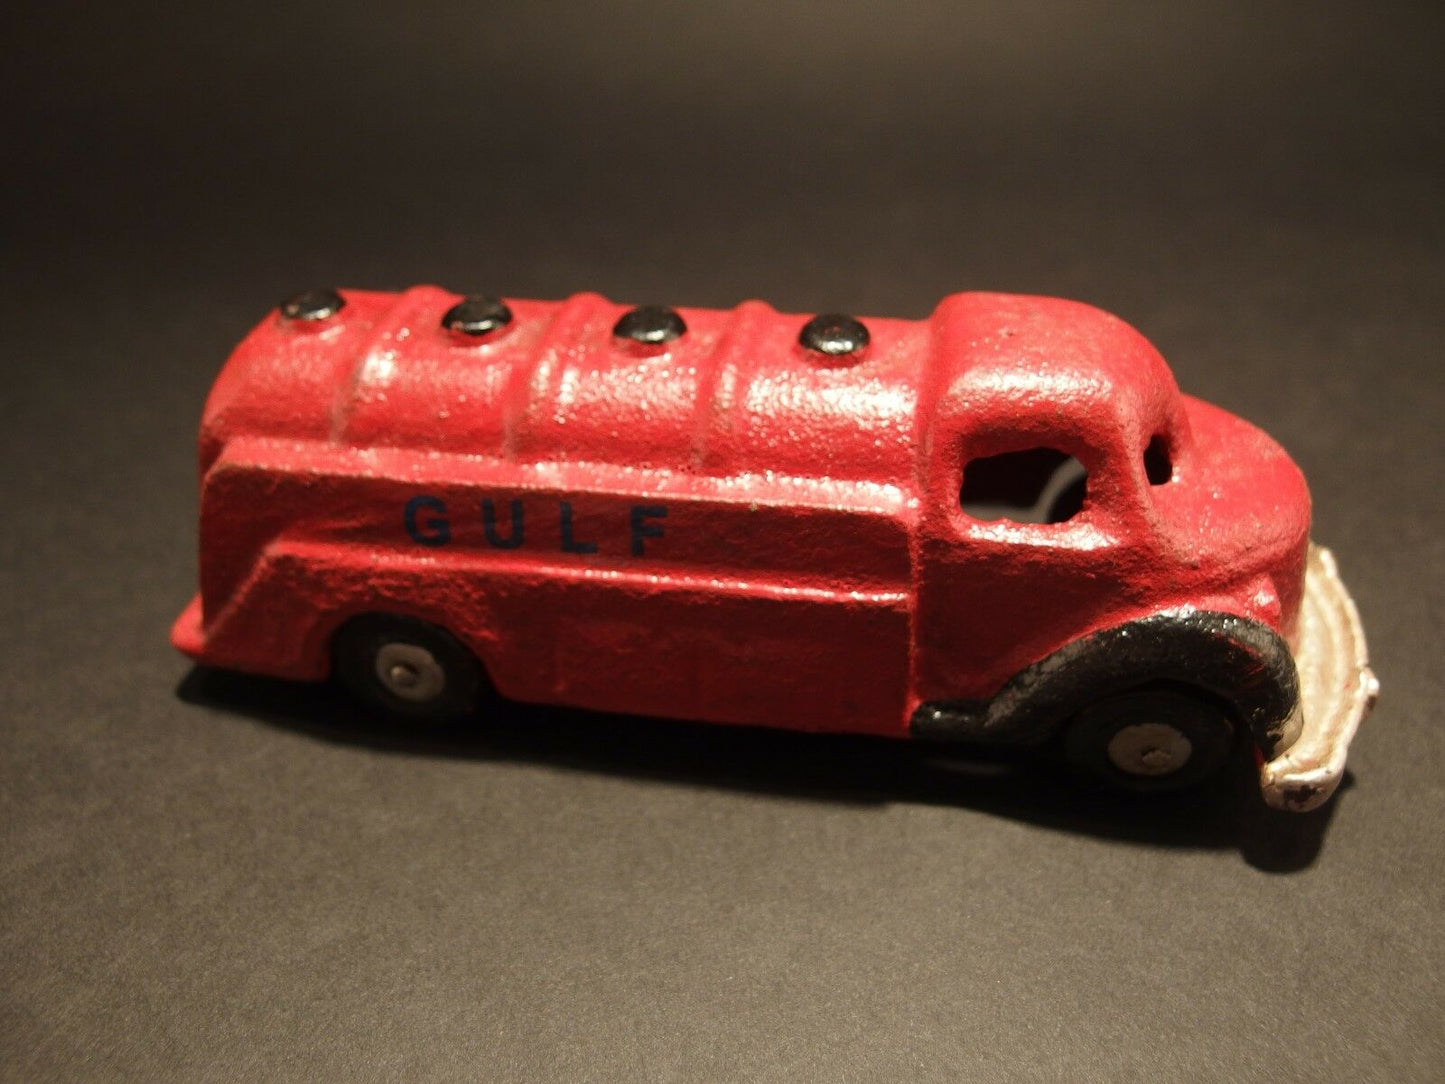 Antique Vintage Style Cast Iron Red Gulf Toy Truck Car - Early Home Decor